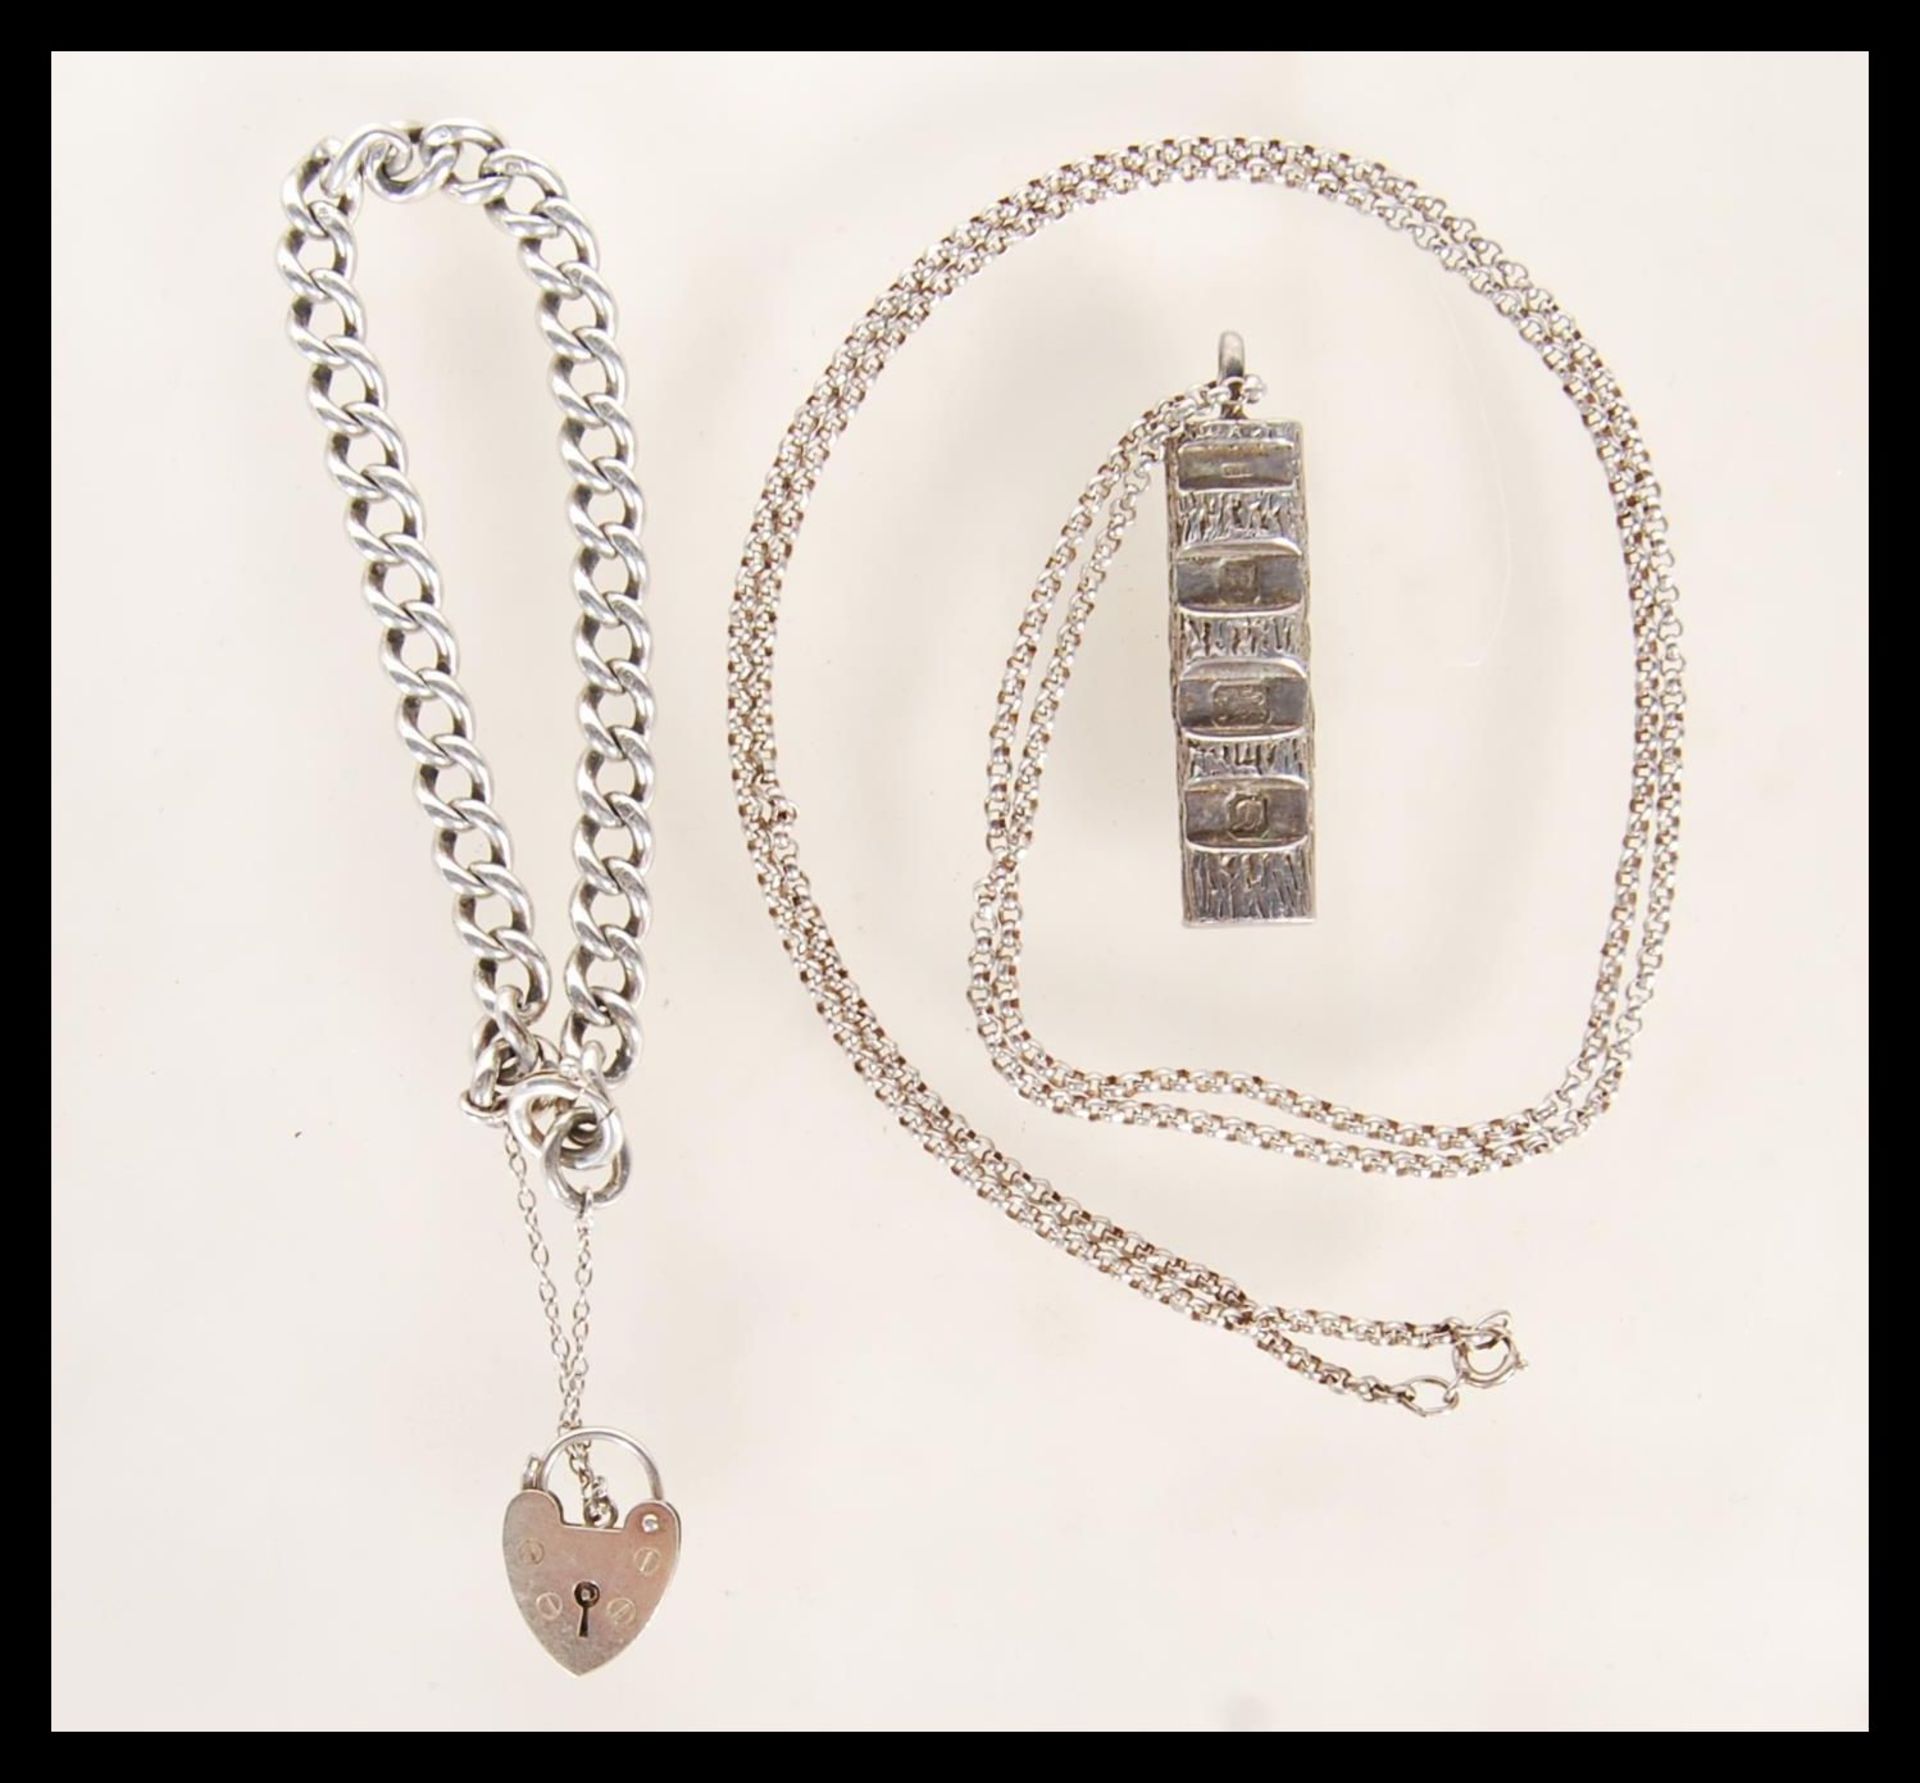 A hallmarked silver ingot pendant on a stamped sterling silver chain, hallmarked London 1978,